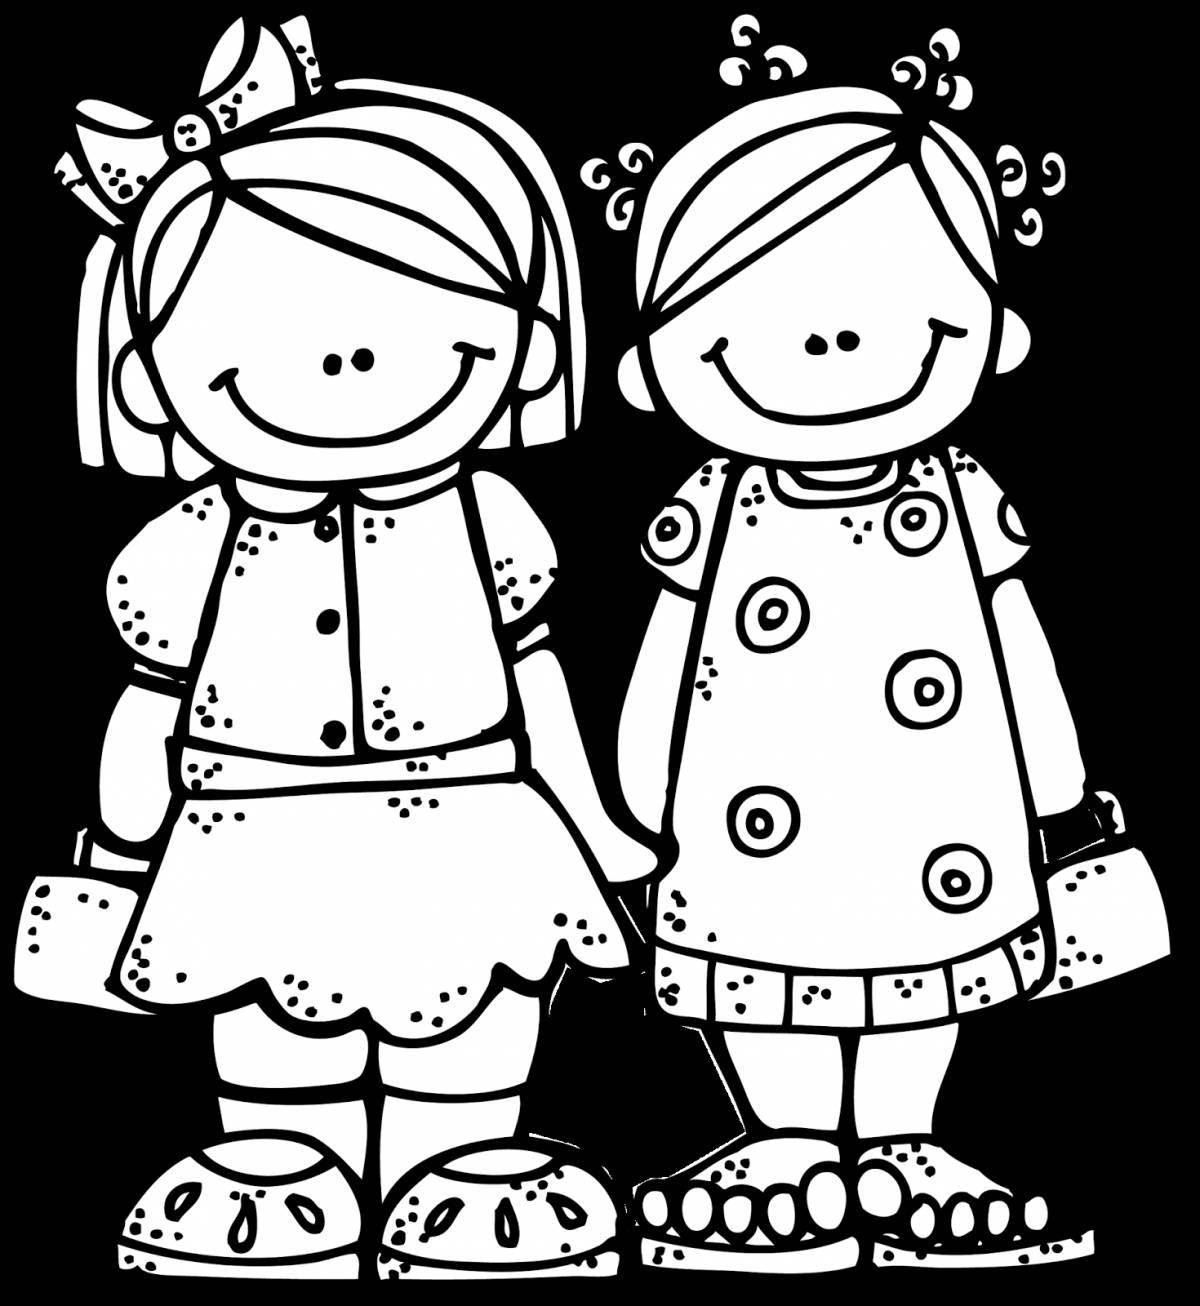 Blissful coloring page 2 for girls